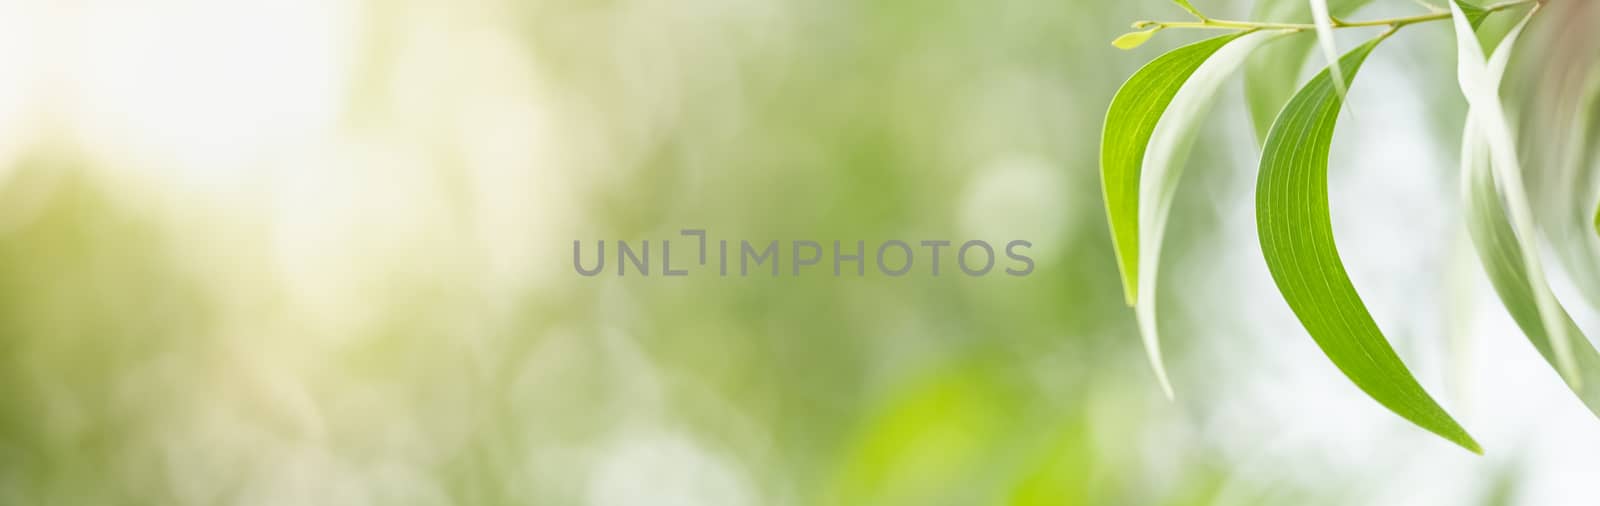 Close up beautiful nature view green leaf on blurred greenery ba by mthipsorn